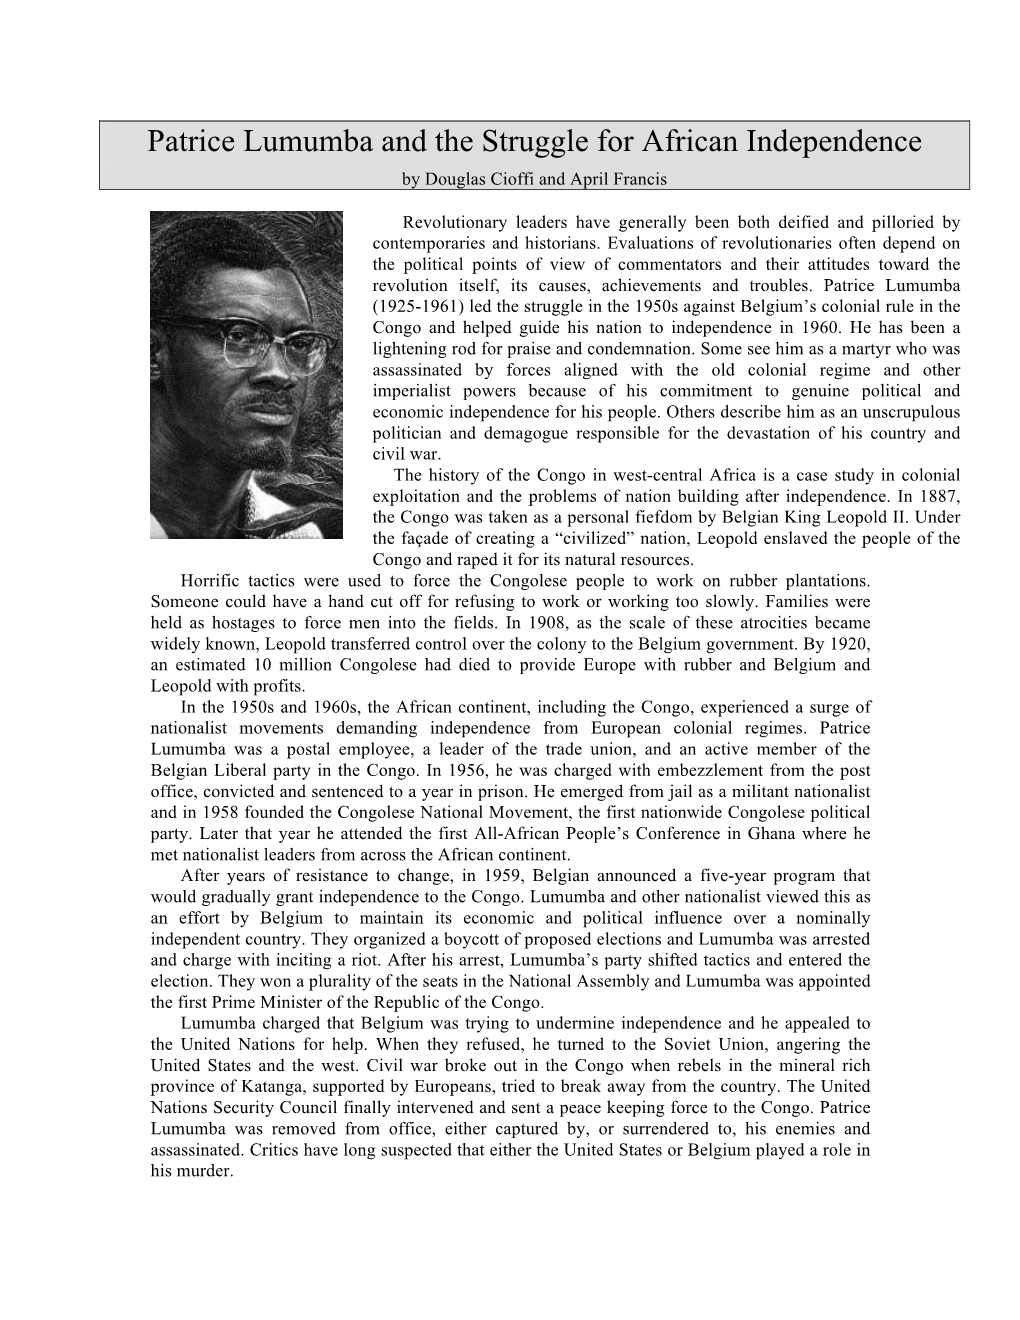 Patrice Lumumba and the Struggle for African Independence by Douglas Cioffi and April Francis